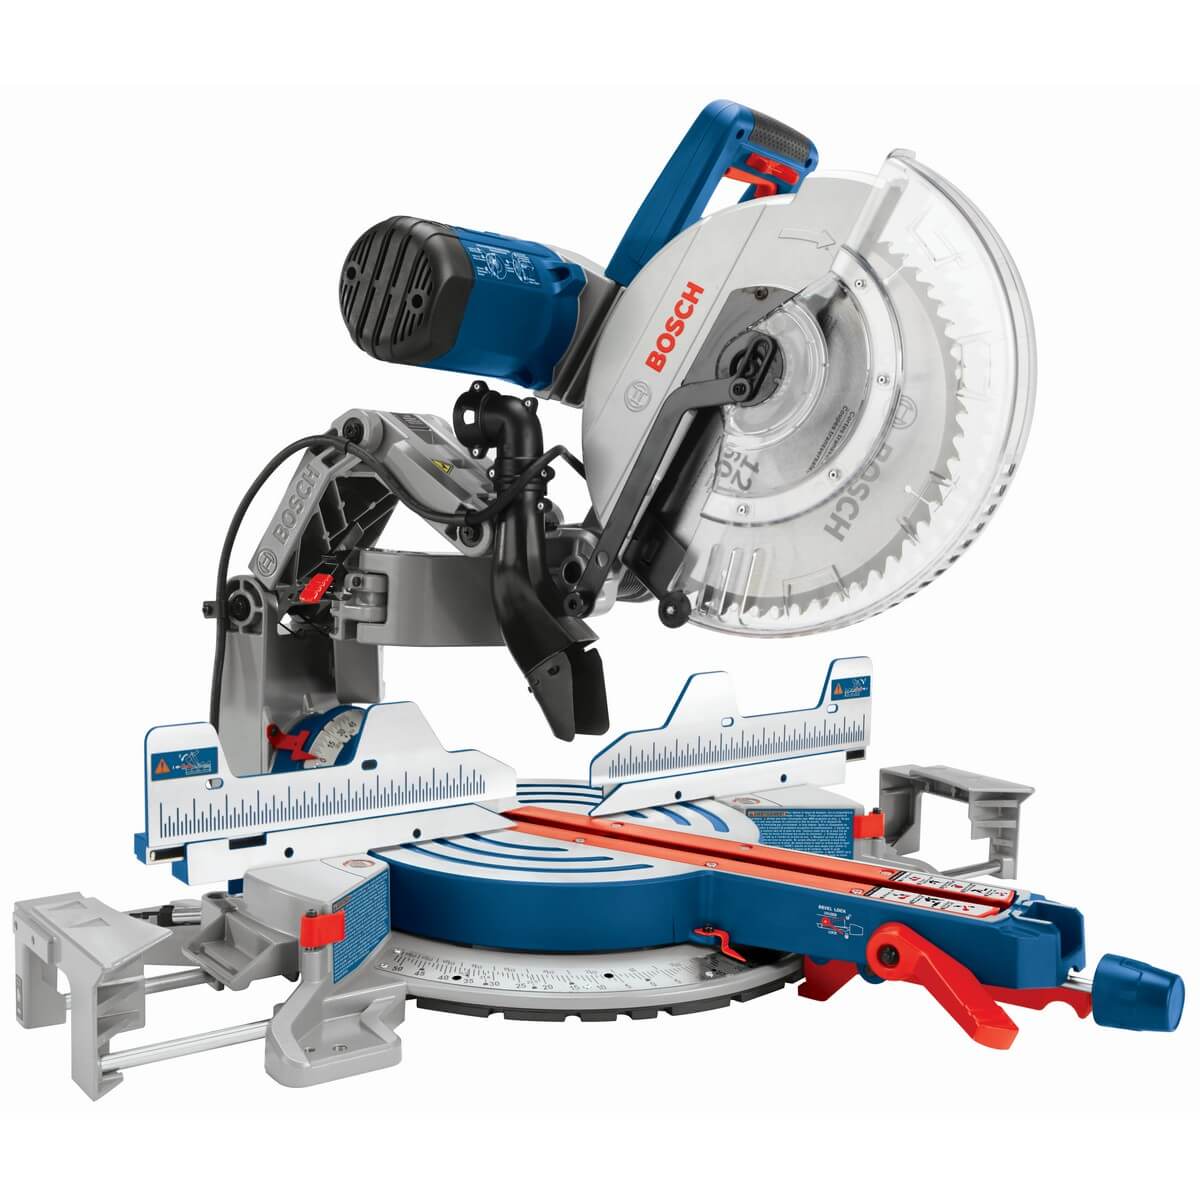 Bosch GCM12SD - 12" Dual Bevel Glide Miter Saw - wise-line-tools